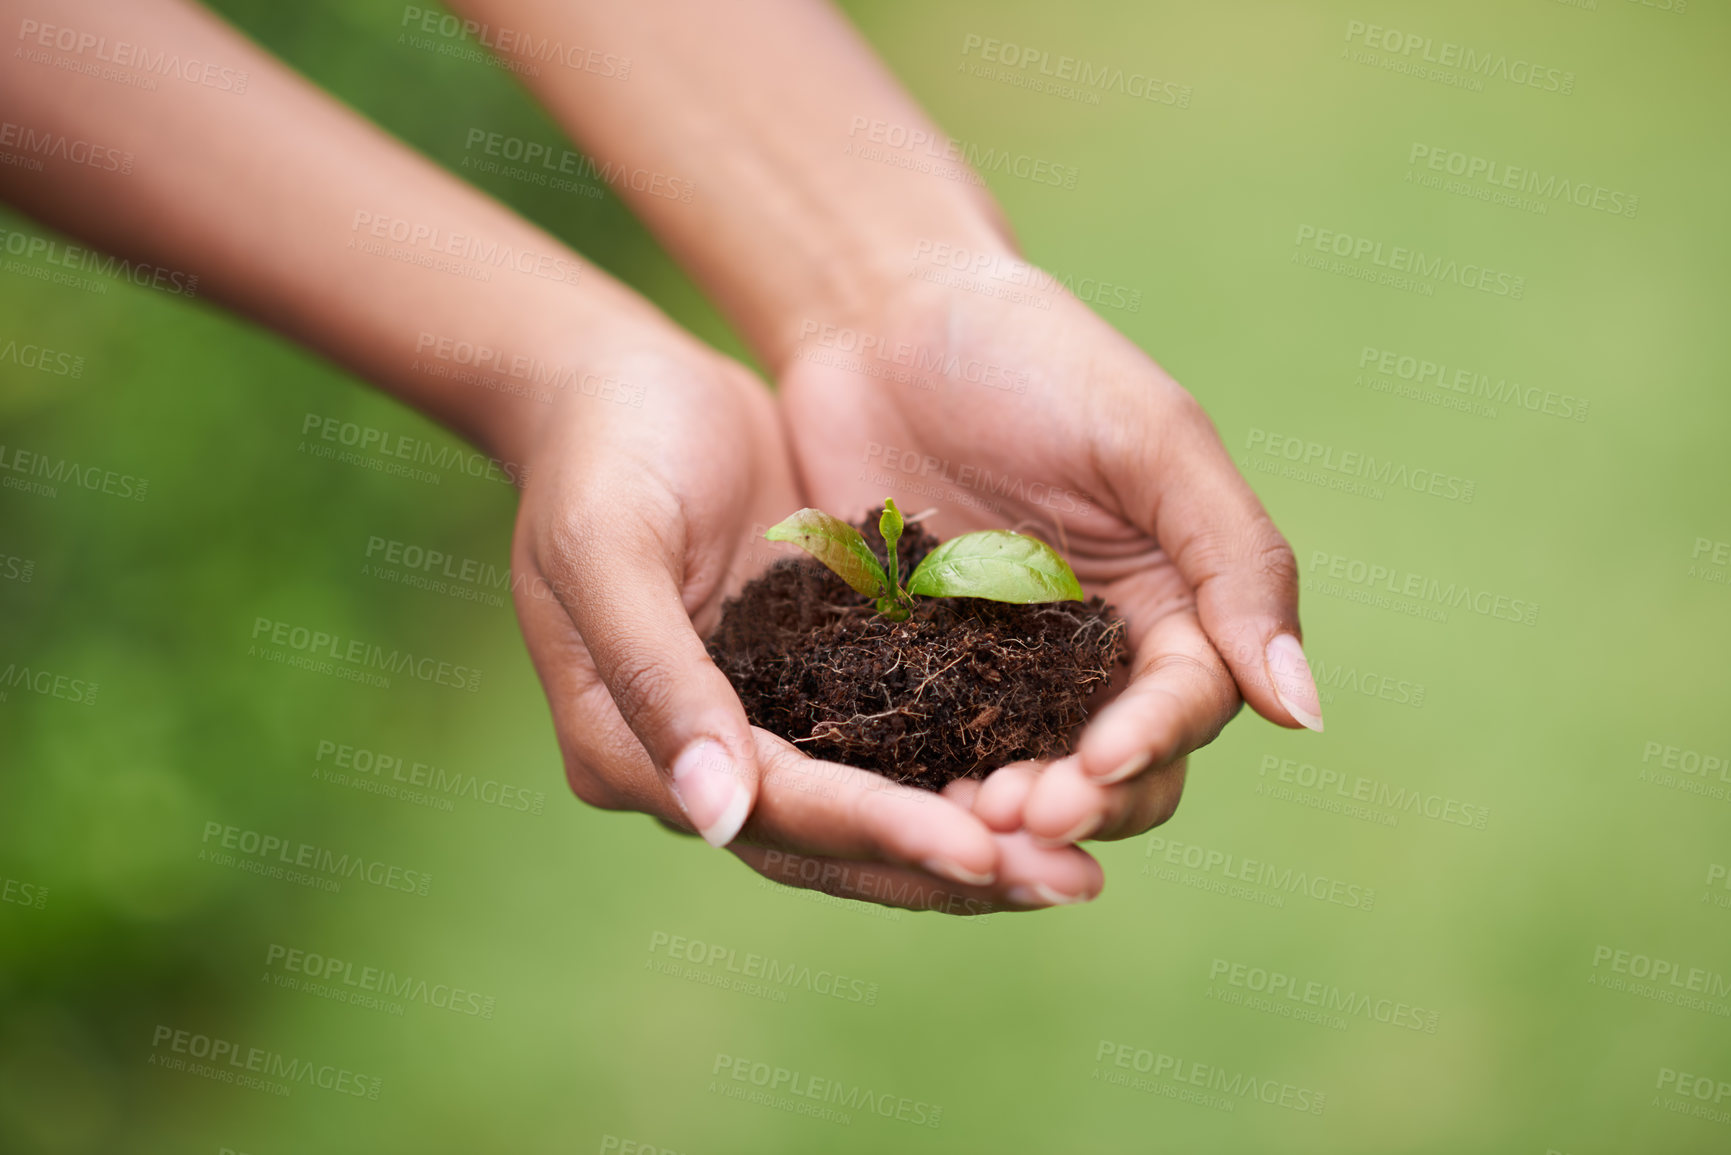 Buy stock photo Soil in hands of woman, plant and ecology with growth of environment, nature and sustainability with life. Leaves, development and eco friendly, hope and new beginning or start with agriculture